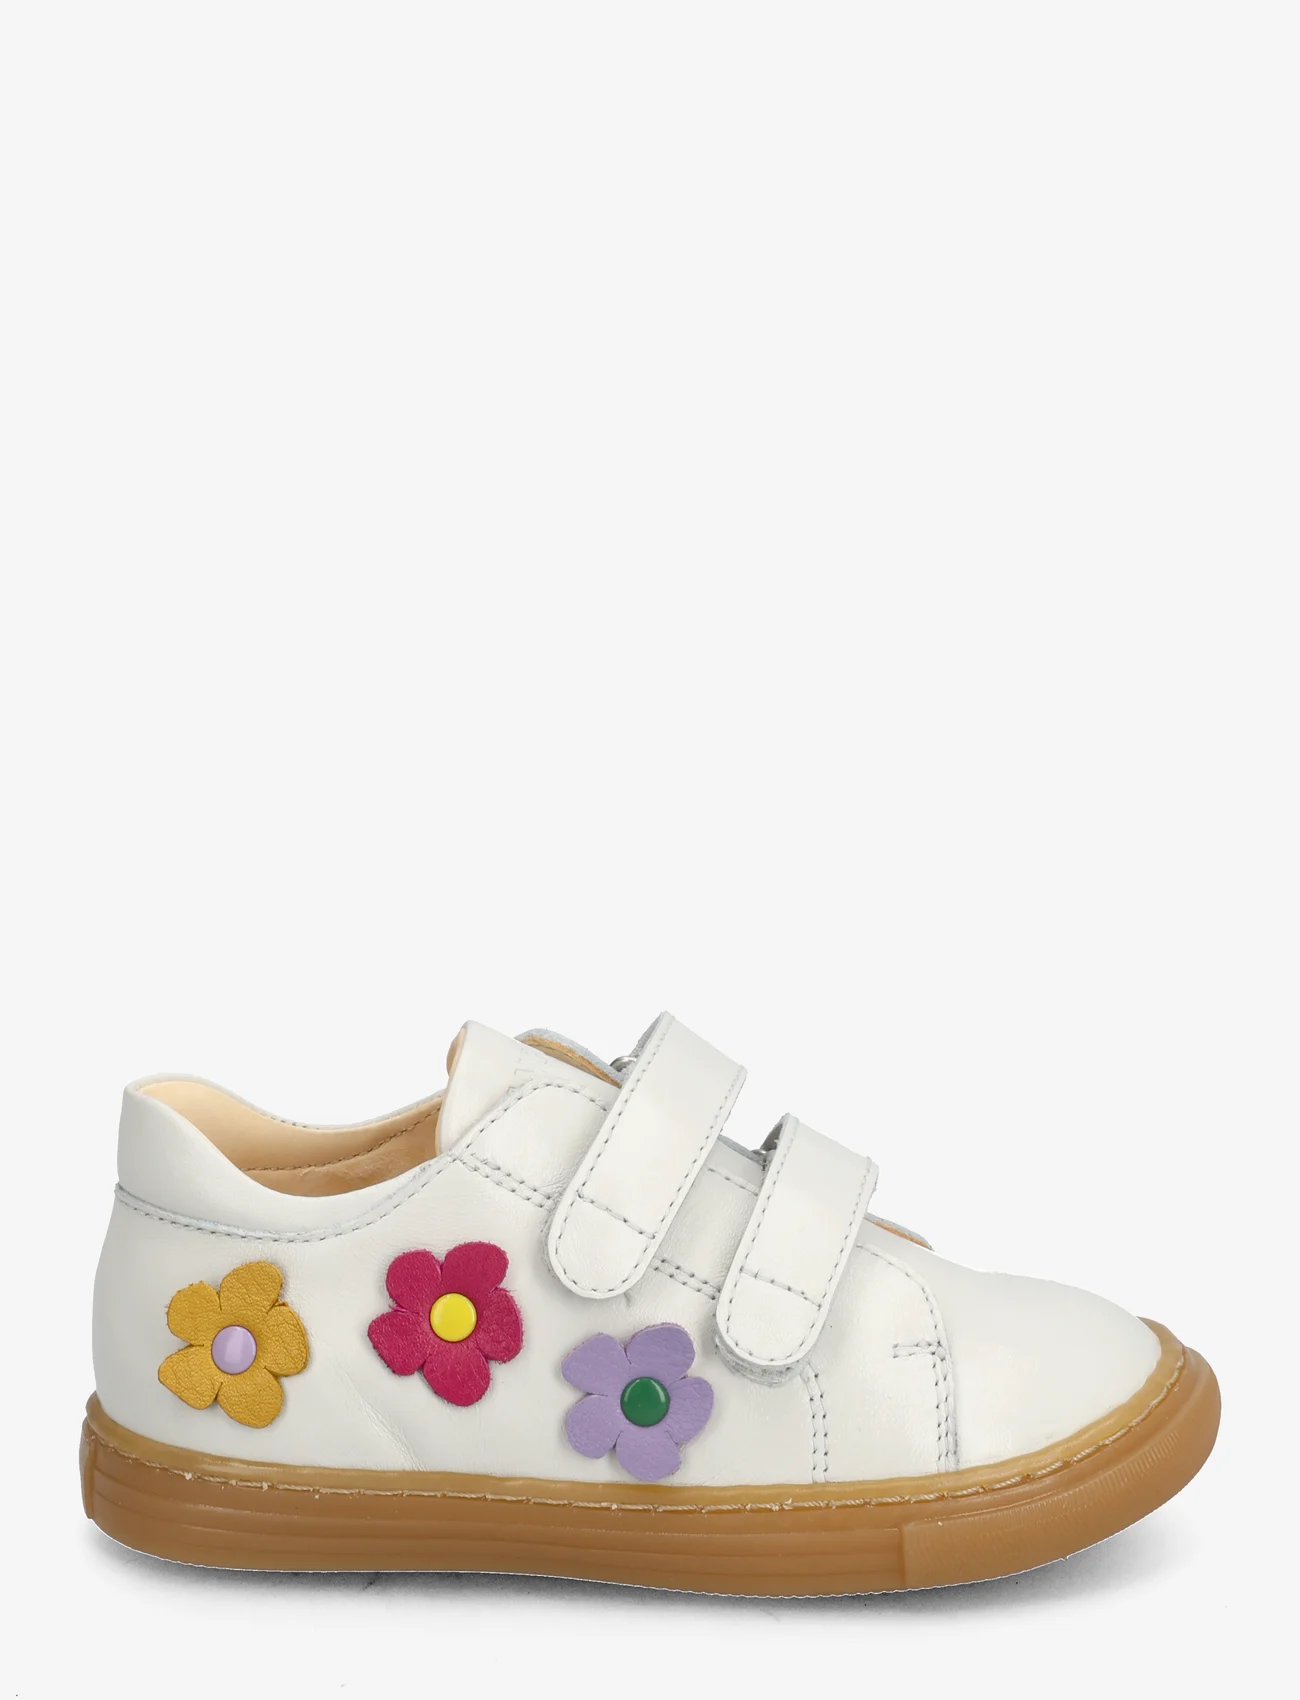 ANGULUS - Shoes - flat - with velcro - sommerschnäppchen - 1493/a001 off white/flowers - 1